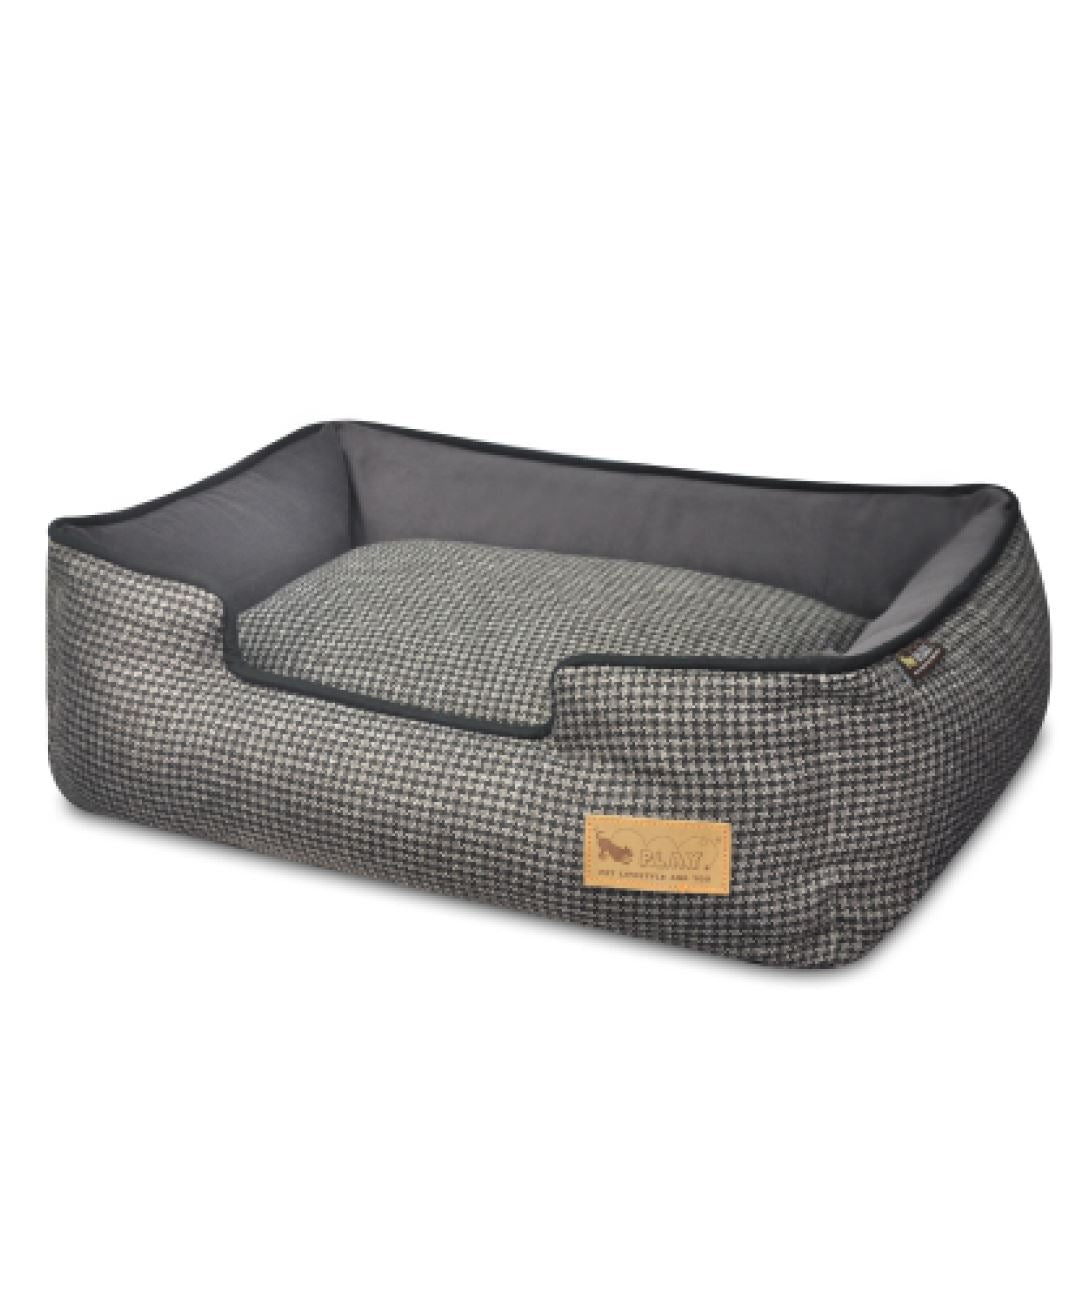 P.L.A.Y. Houndstooth Lounge Dog Bed (2 Colors) Dog Bed PLAY S Houndstooth Gray 